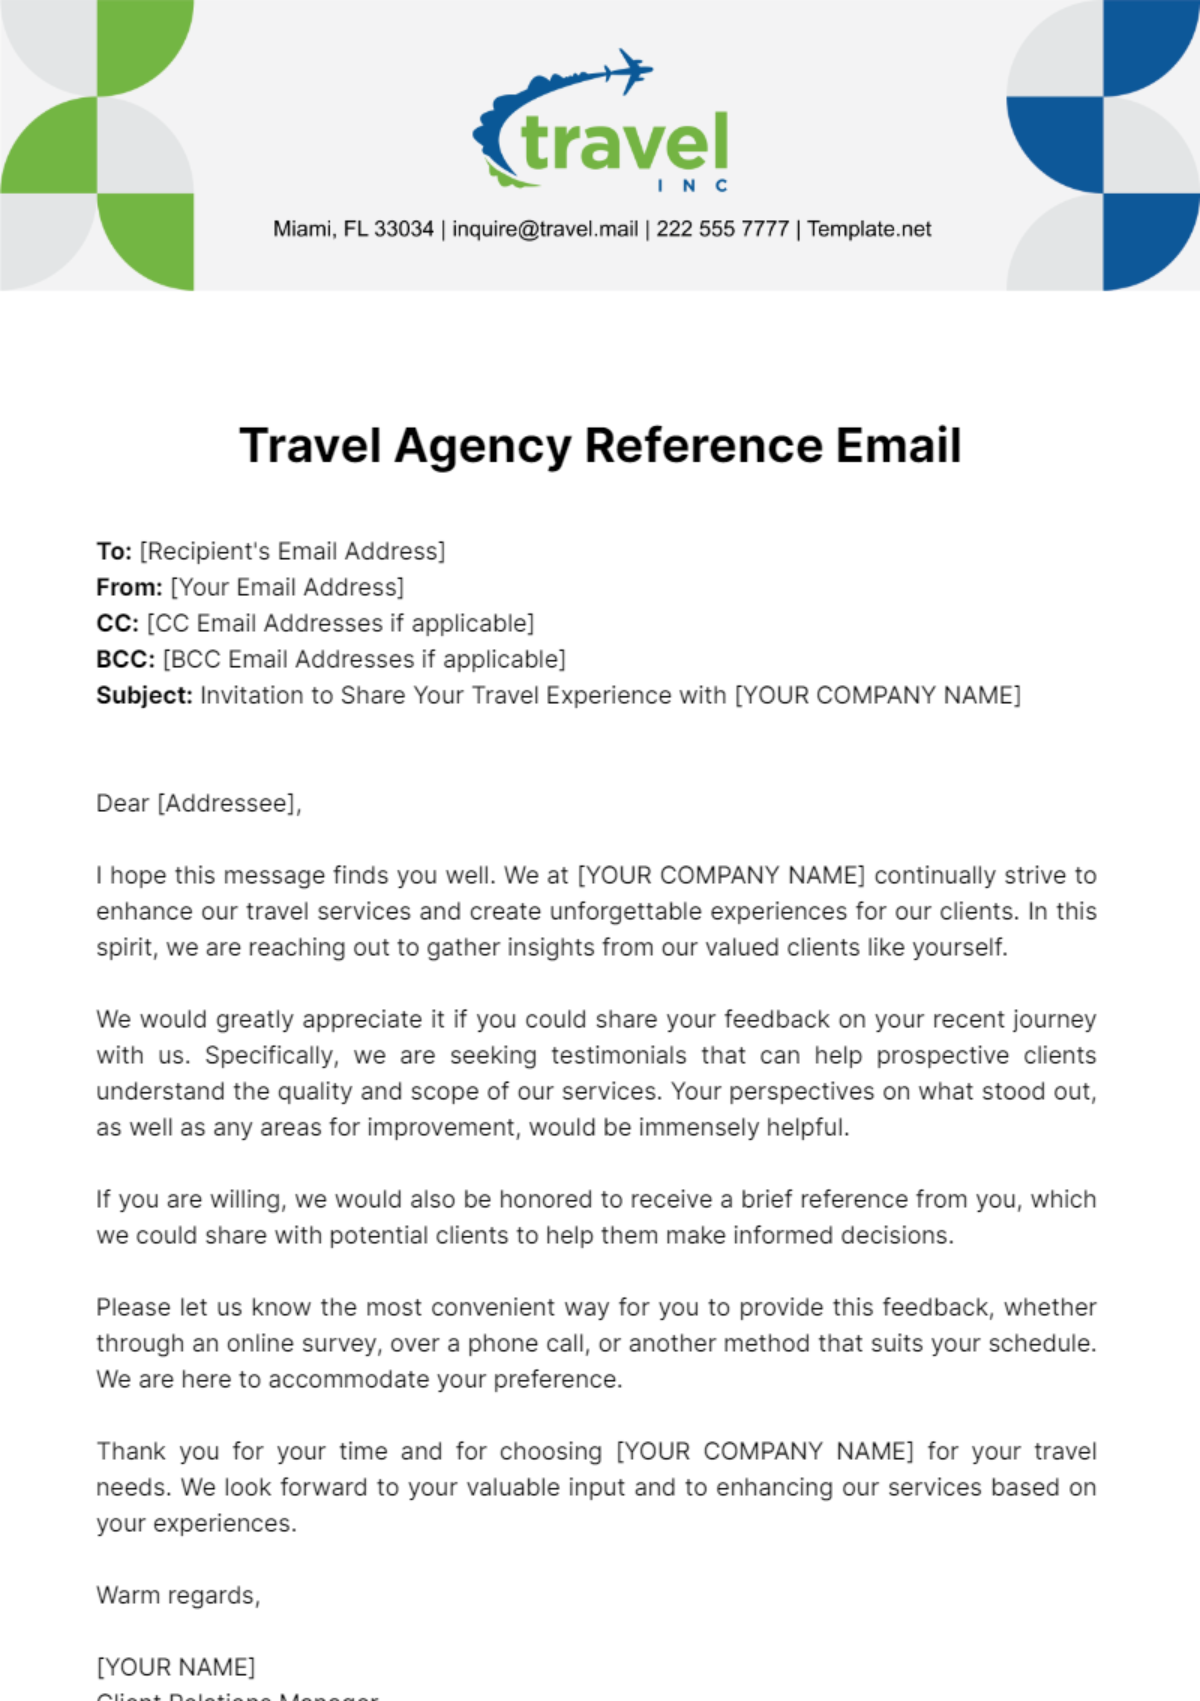 Free Travel Agency Reference Email Template